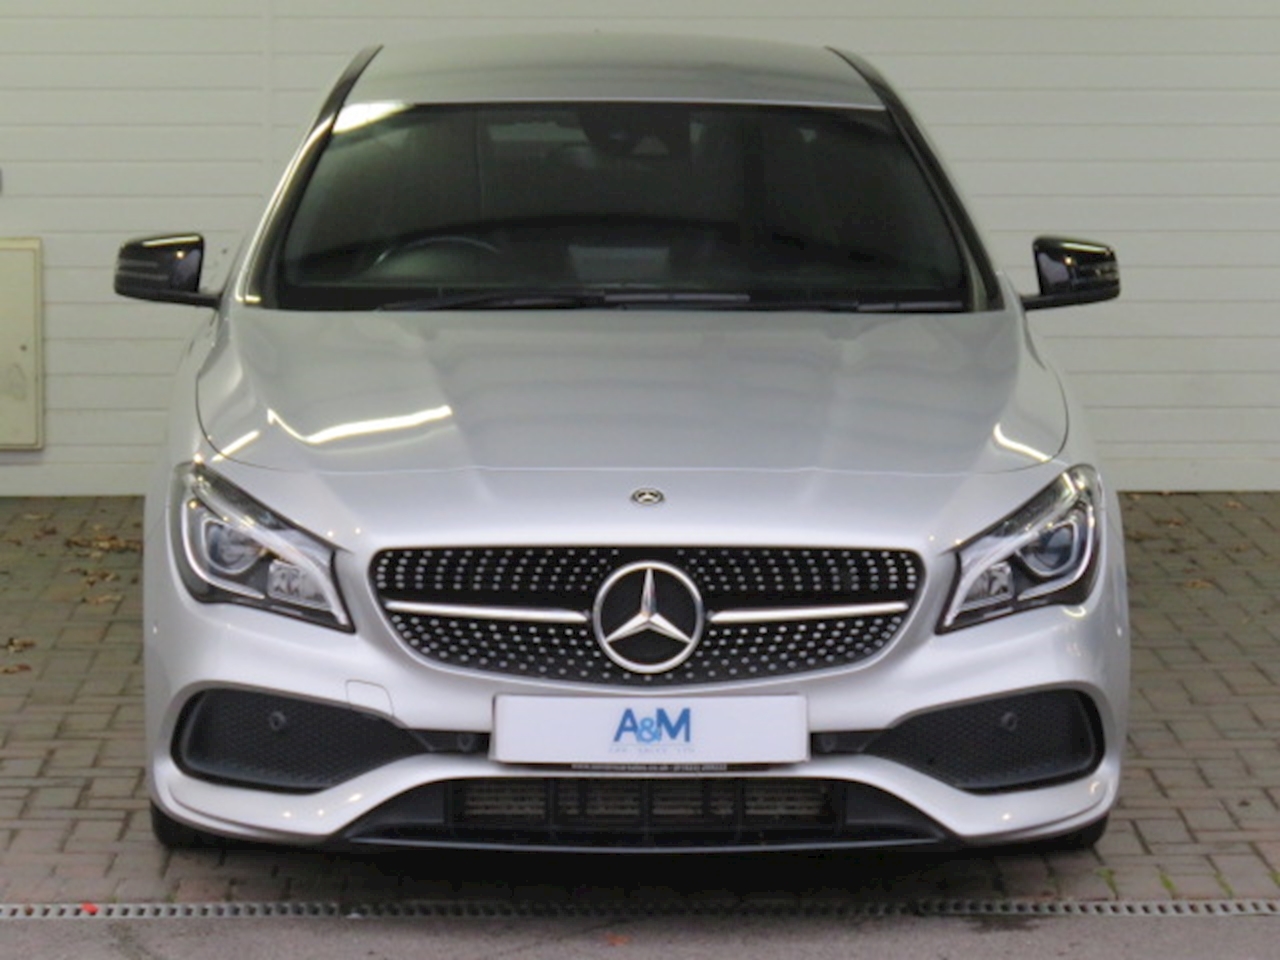 CLA Class AMG Line Coupe 2.1 7G-DCT Diesel